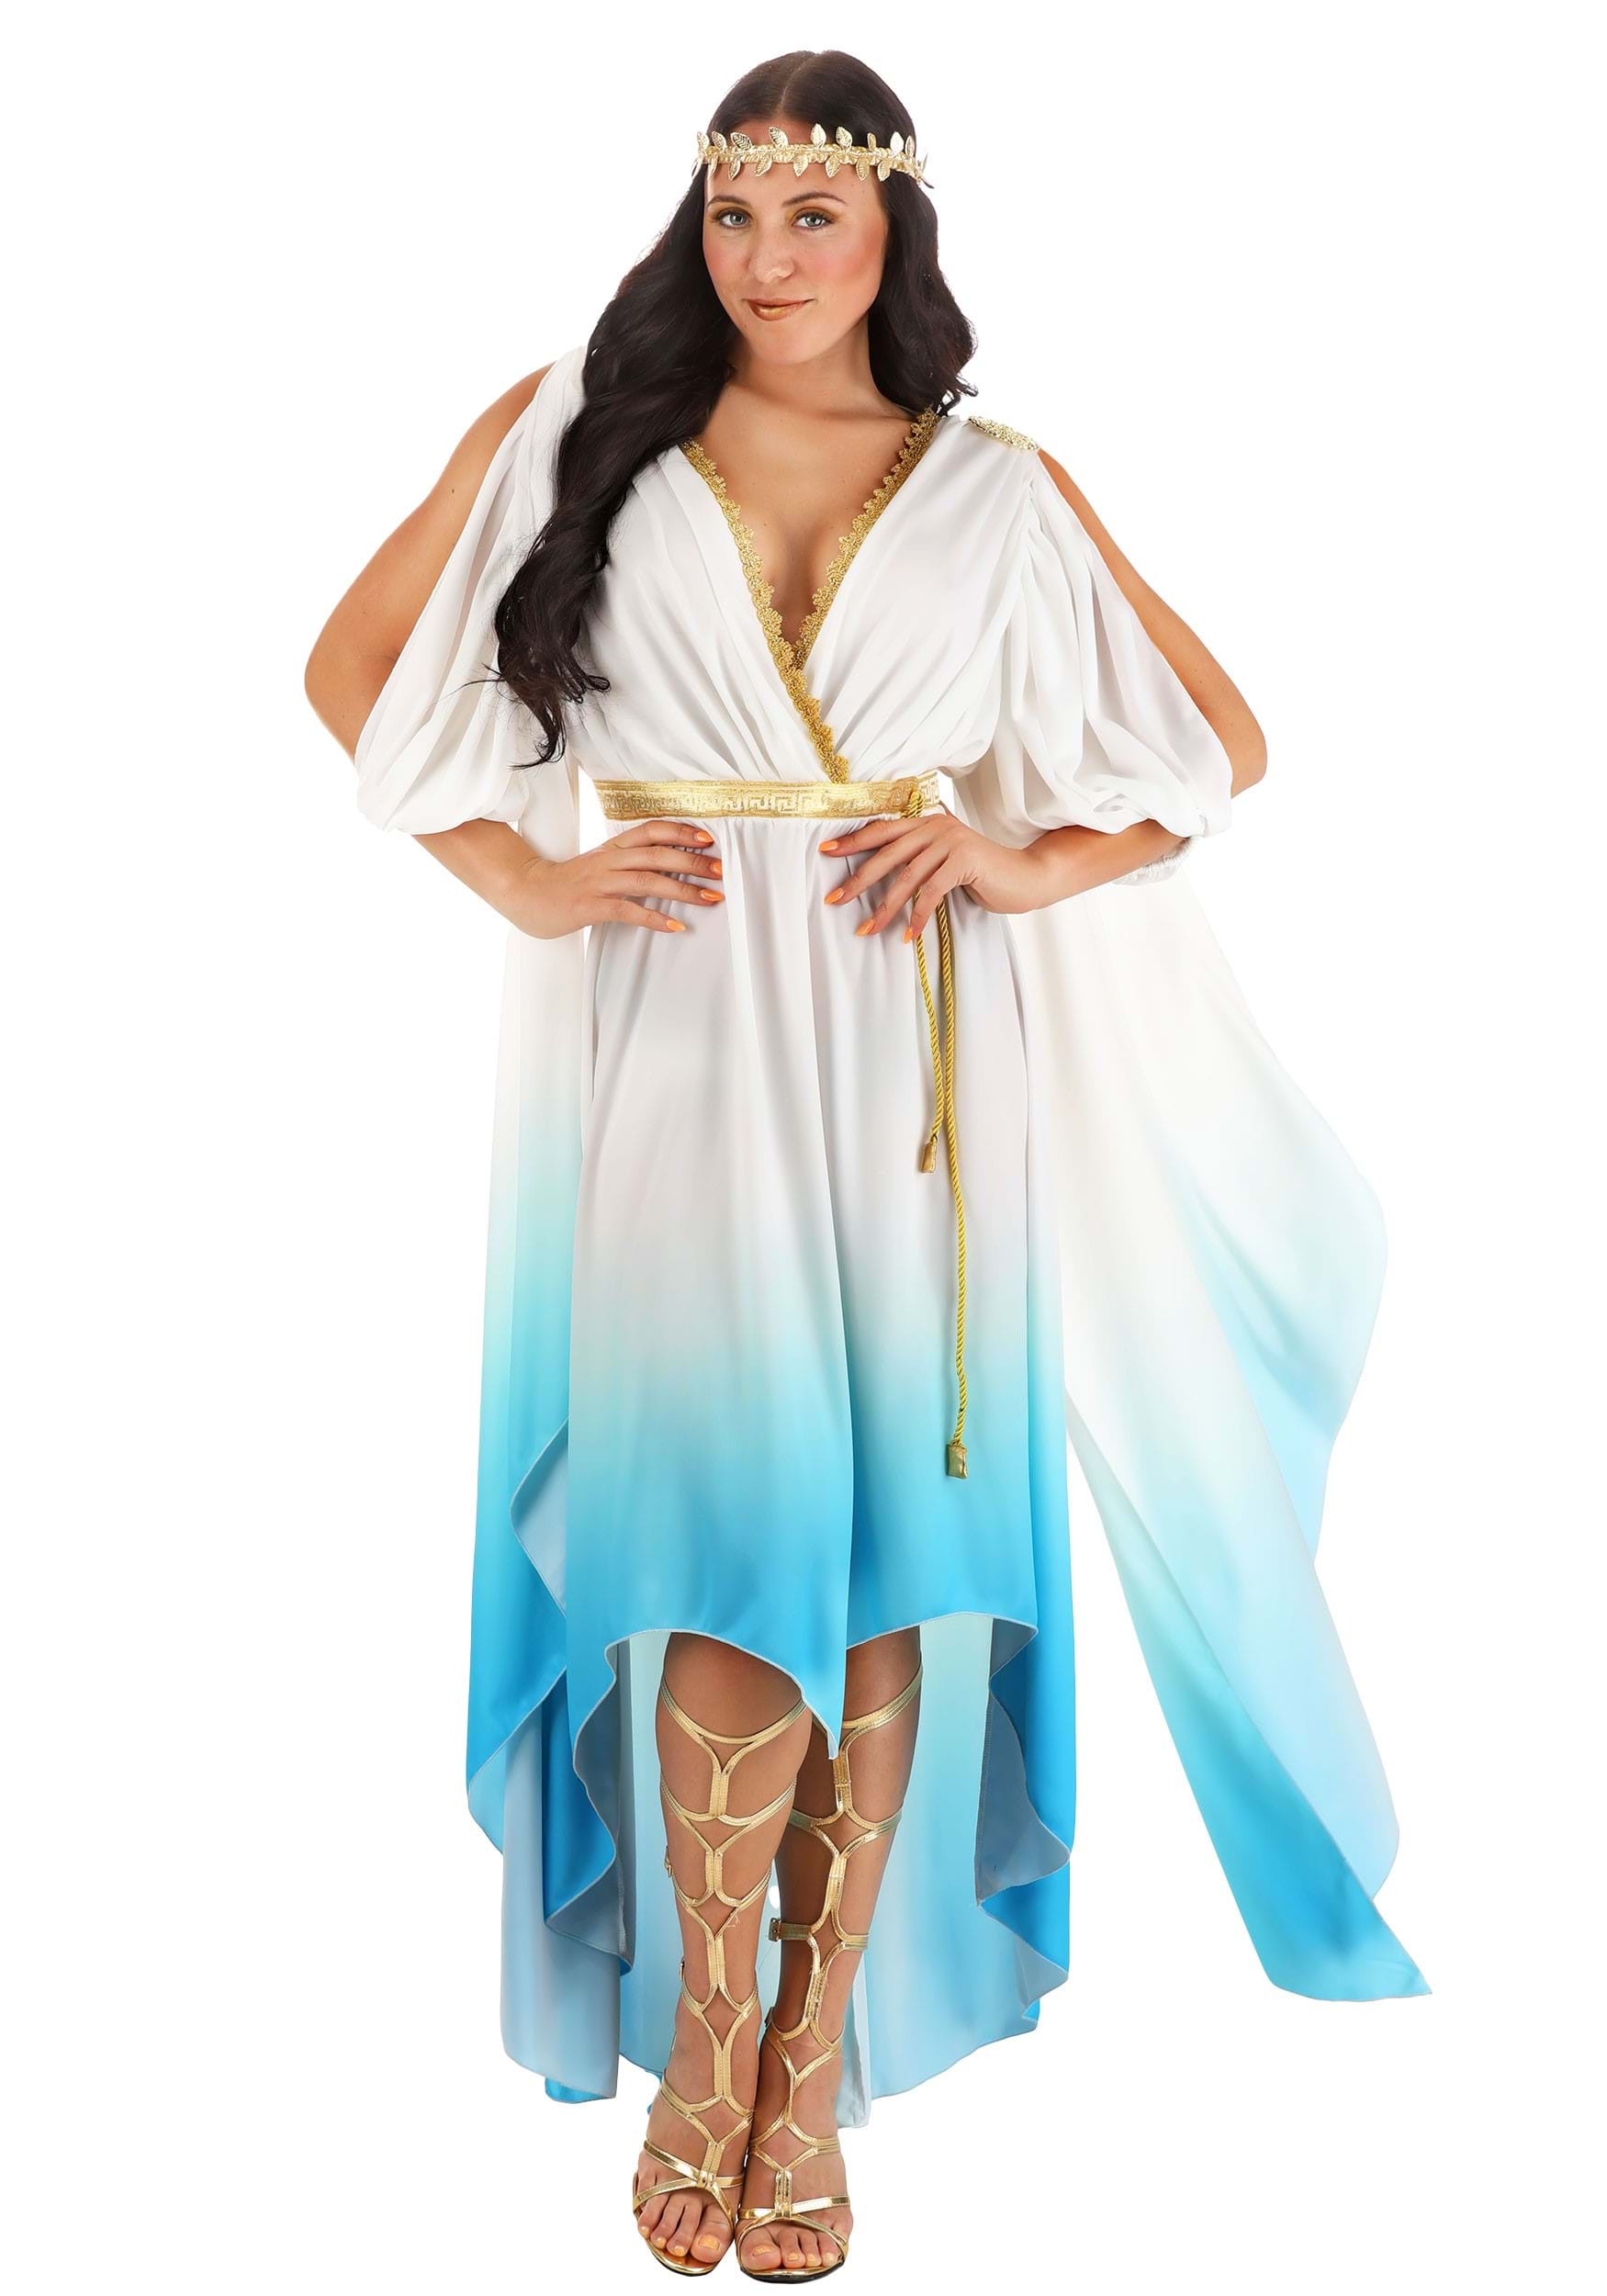 https://images.halloweencostumes.ca/products/88263/1-1/womens-deluxe-goddess-costume-dress.jpg